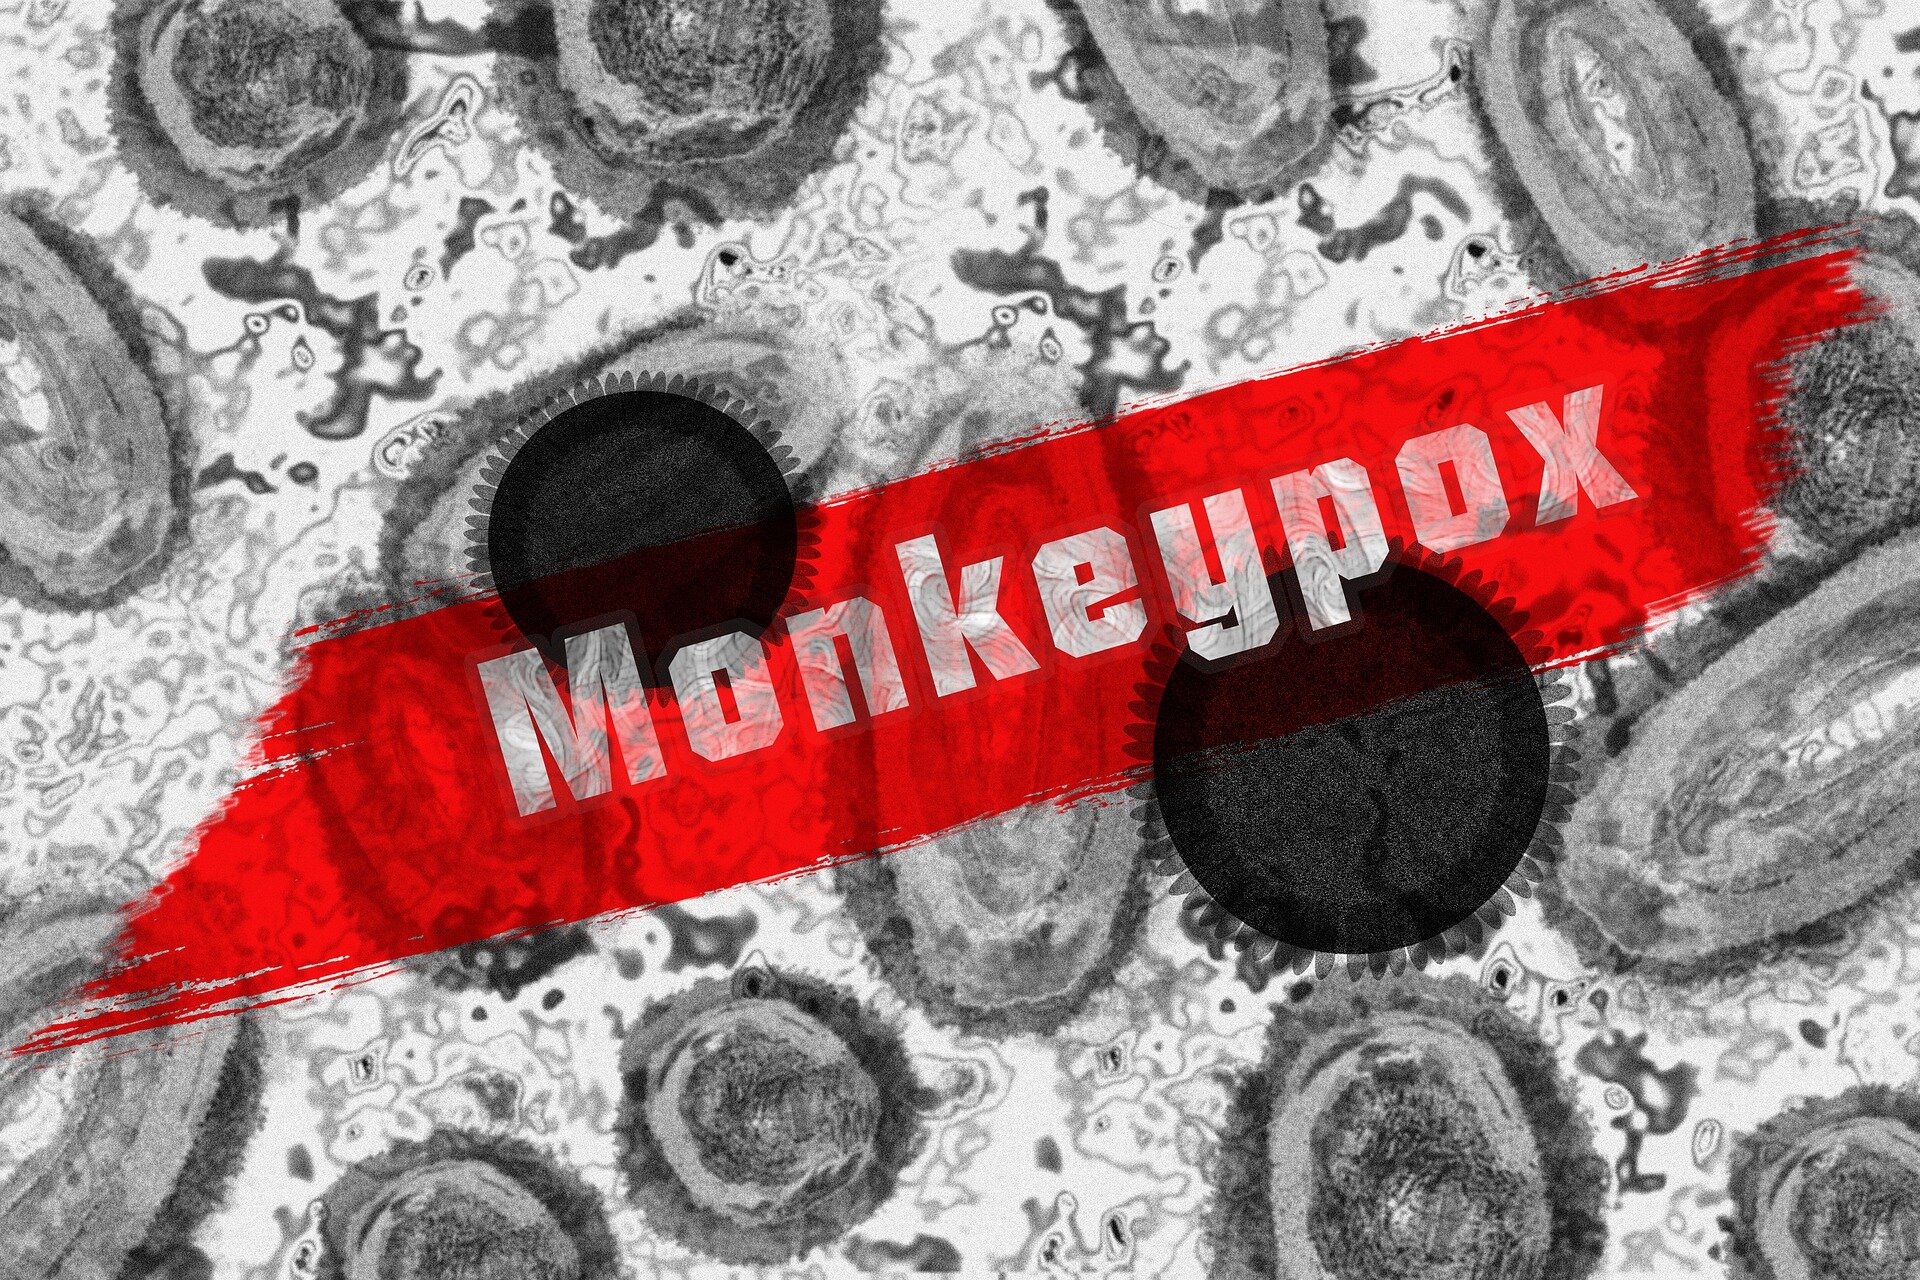 Dearth of high quality monkeypox guidelines may be hampering care globally